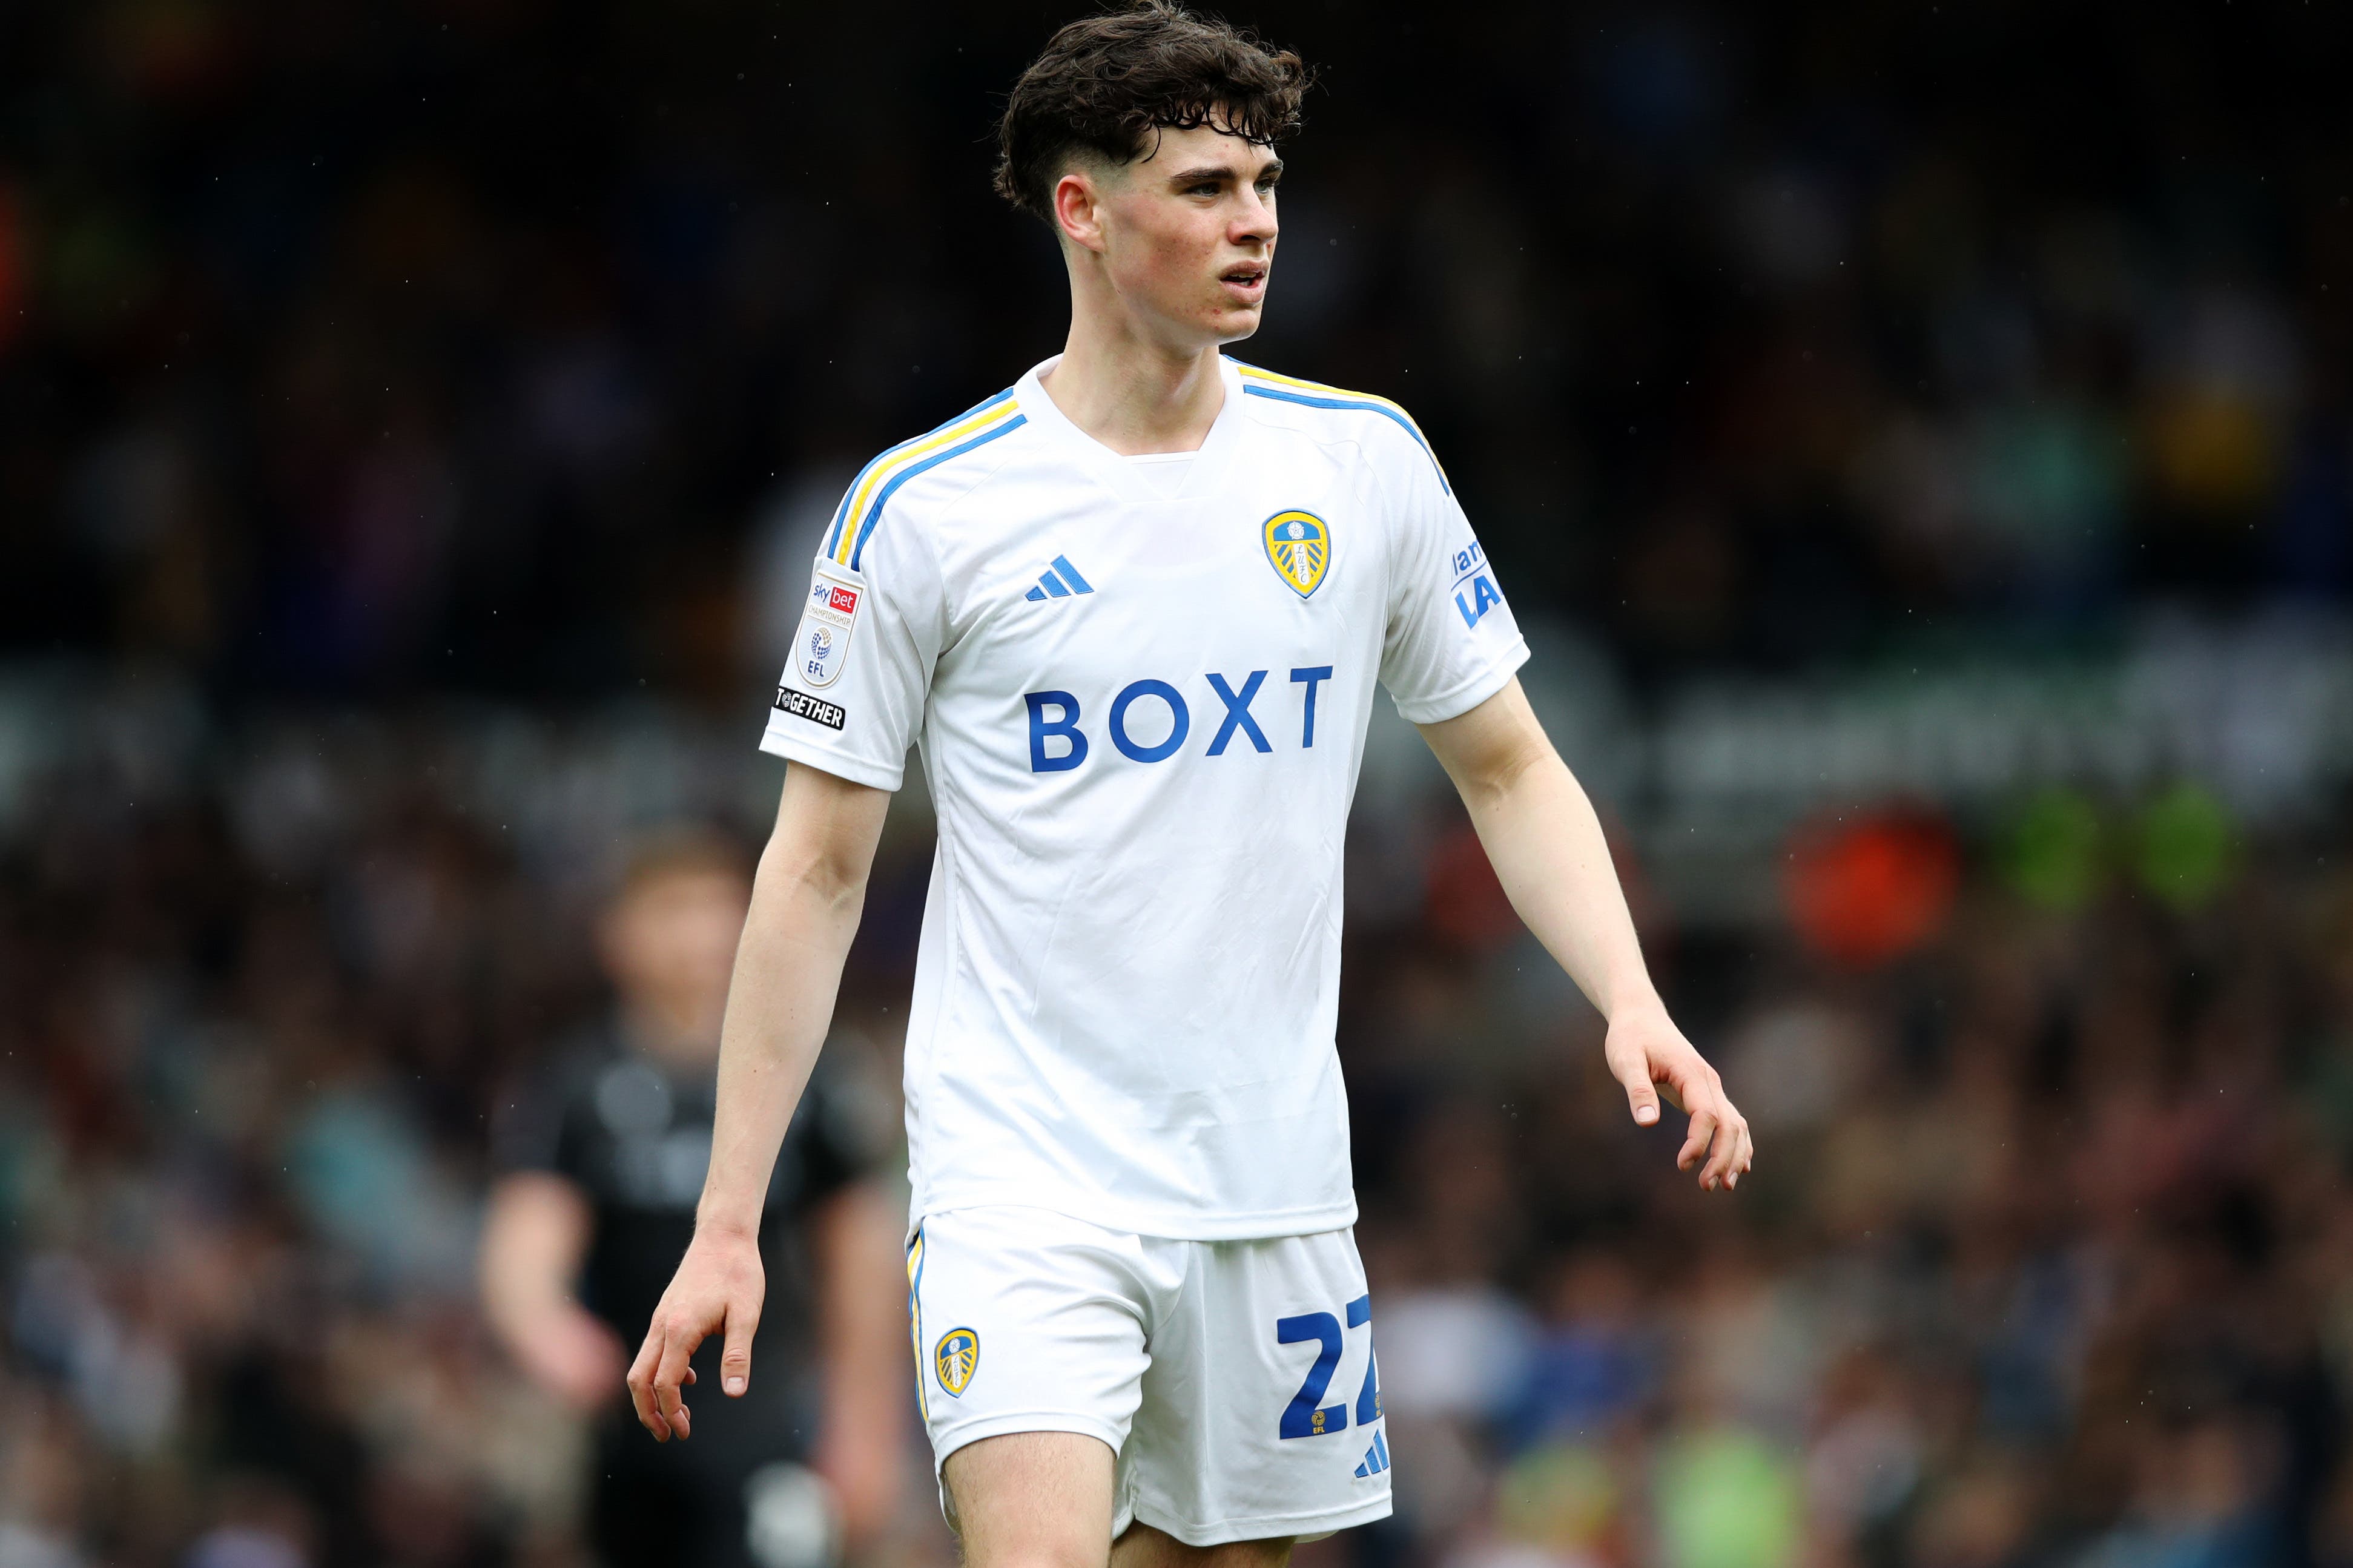 Leeds have rejected a bid for Archie Gray